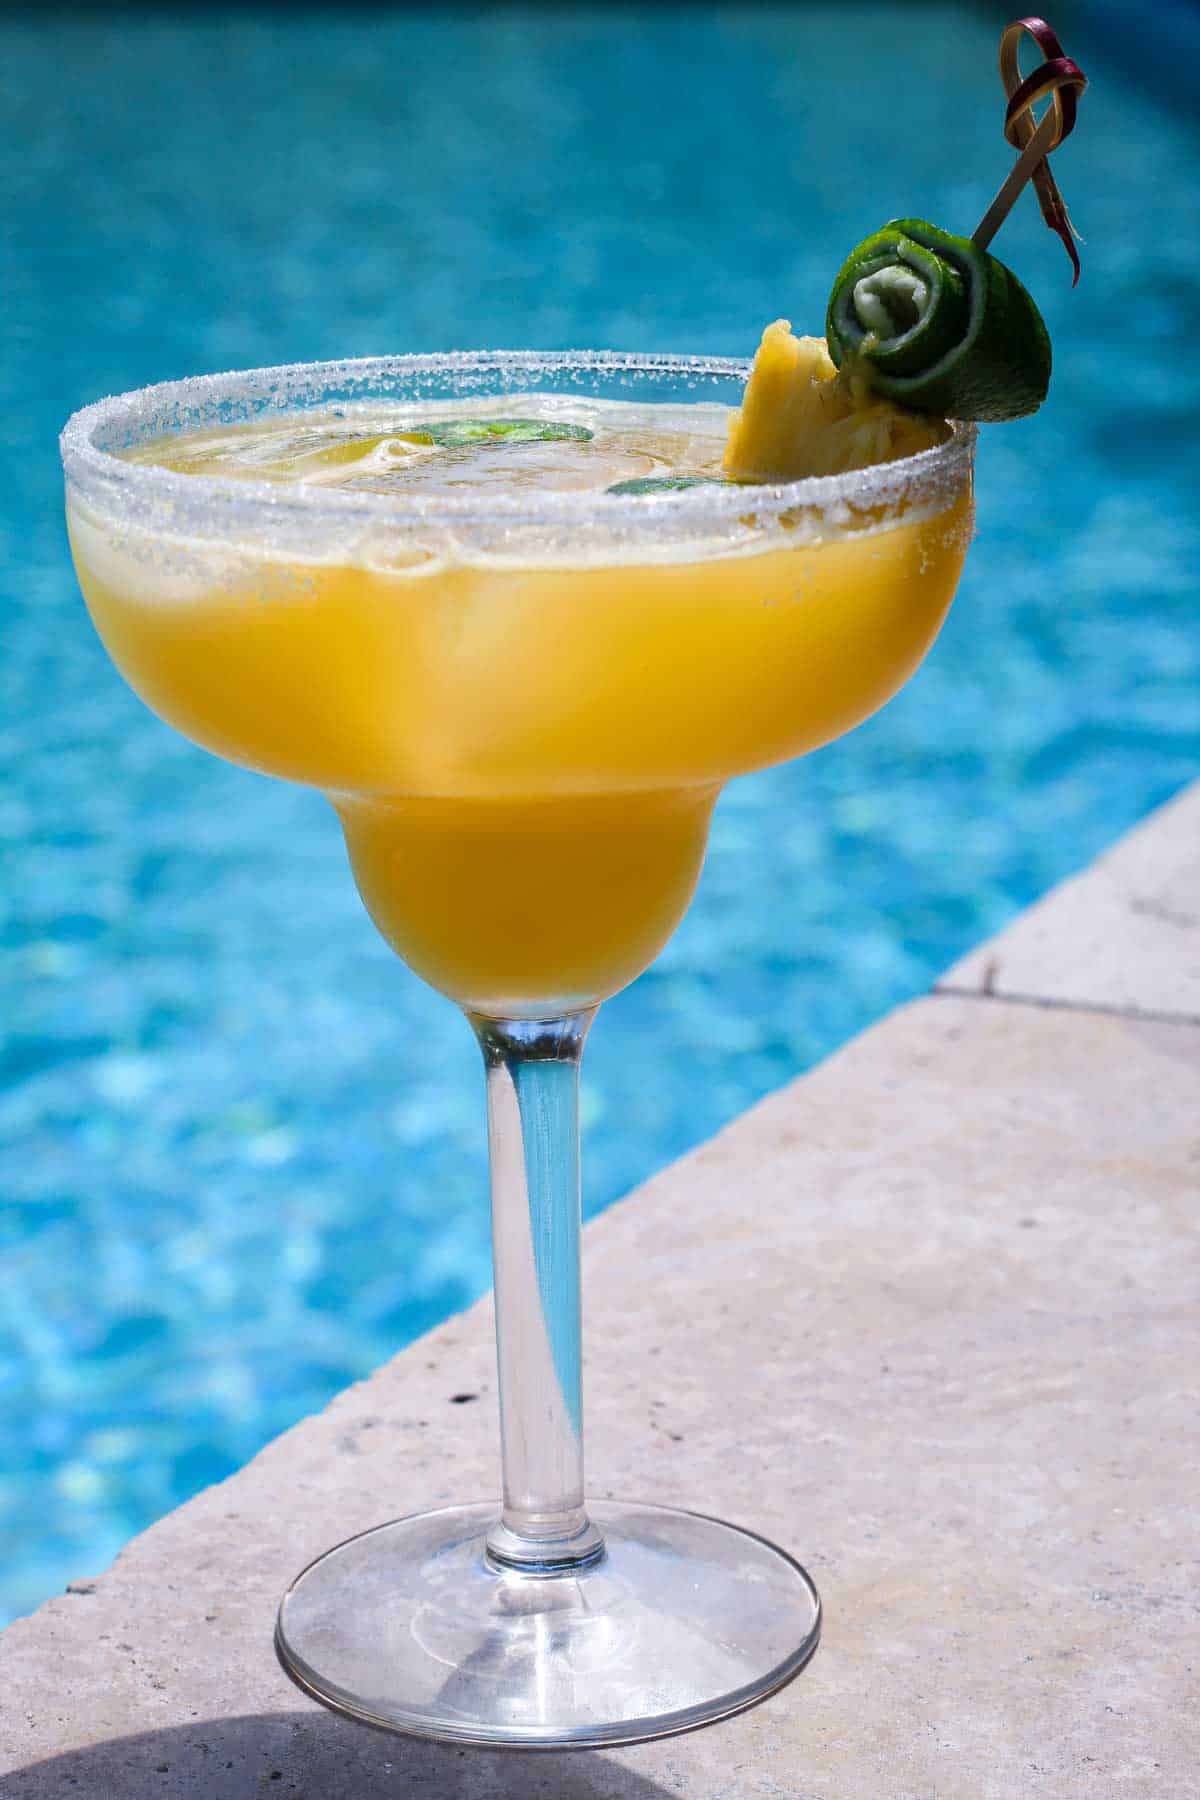 A glass with pineapple margarita, shown poolside with crystal blue water in the background. Drink is garnished with lime peel, pineapple slice and has floating jalapeño slices on top.